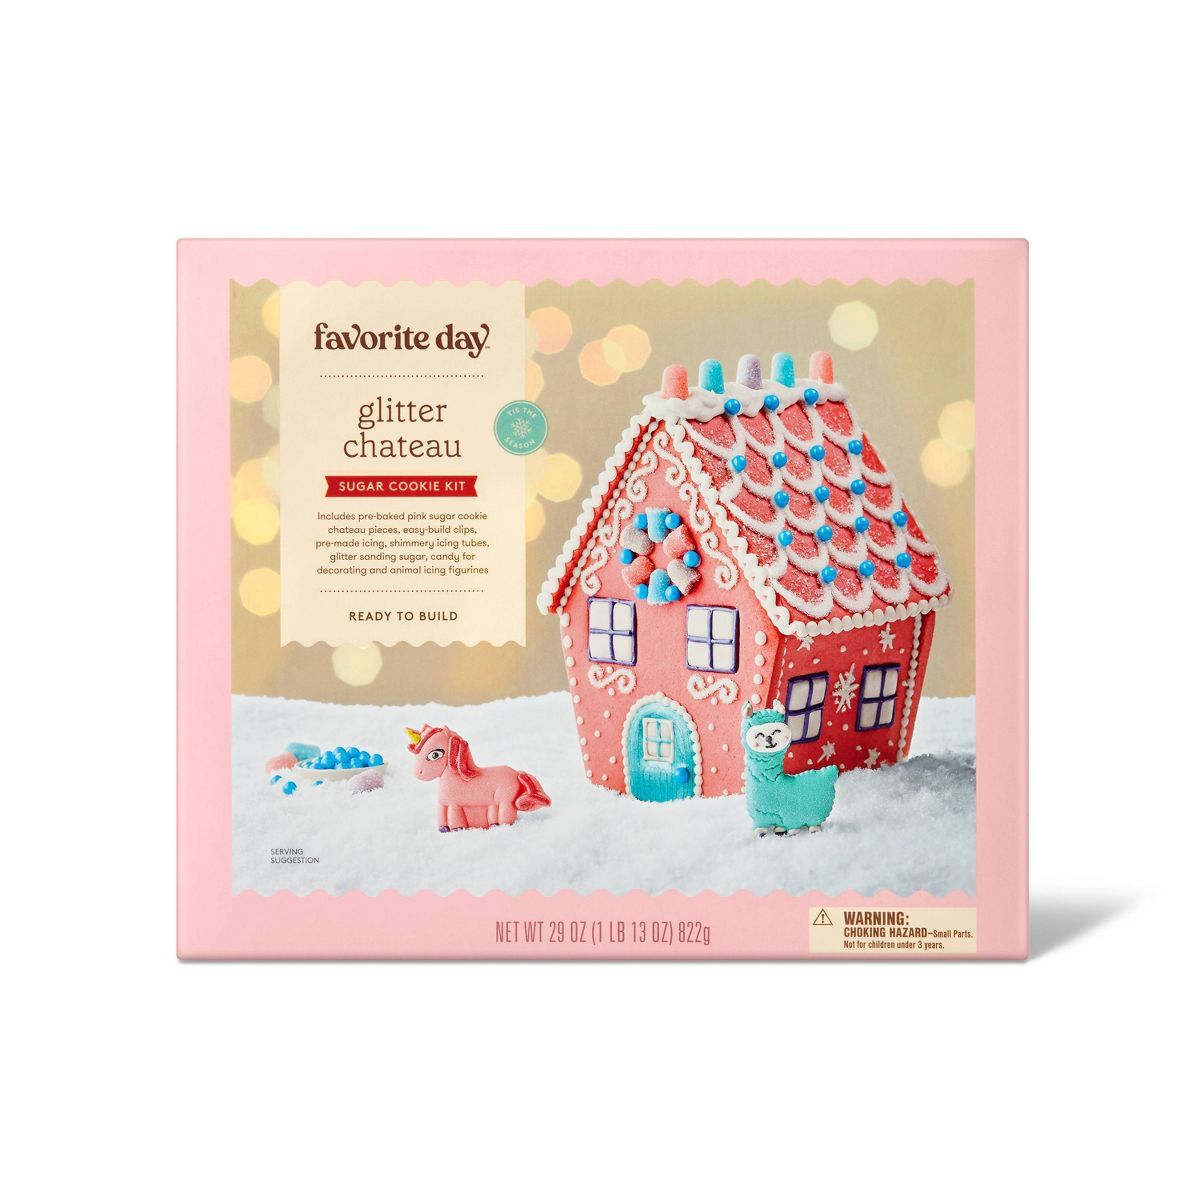 Holiday Glitter Chateau Sugar Cookie Kit - 29oz - Favorite Day™ | Target